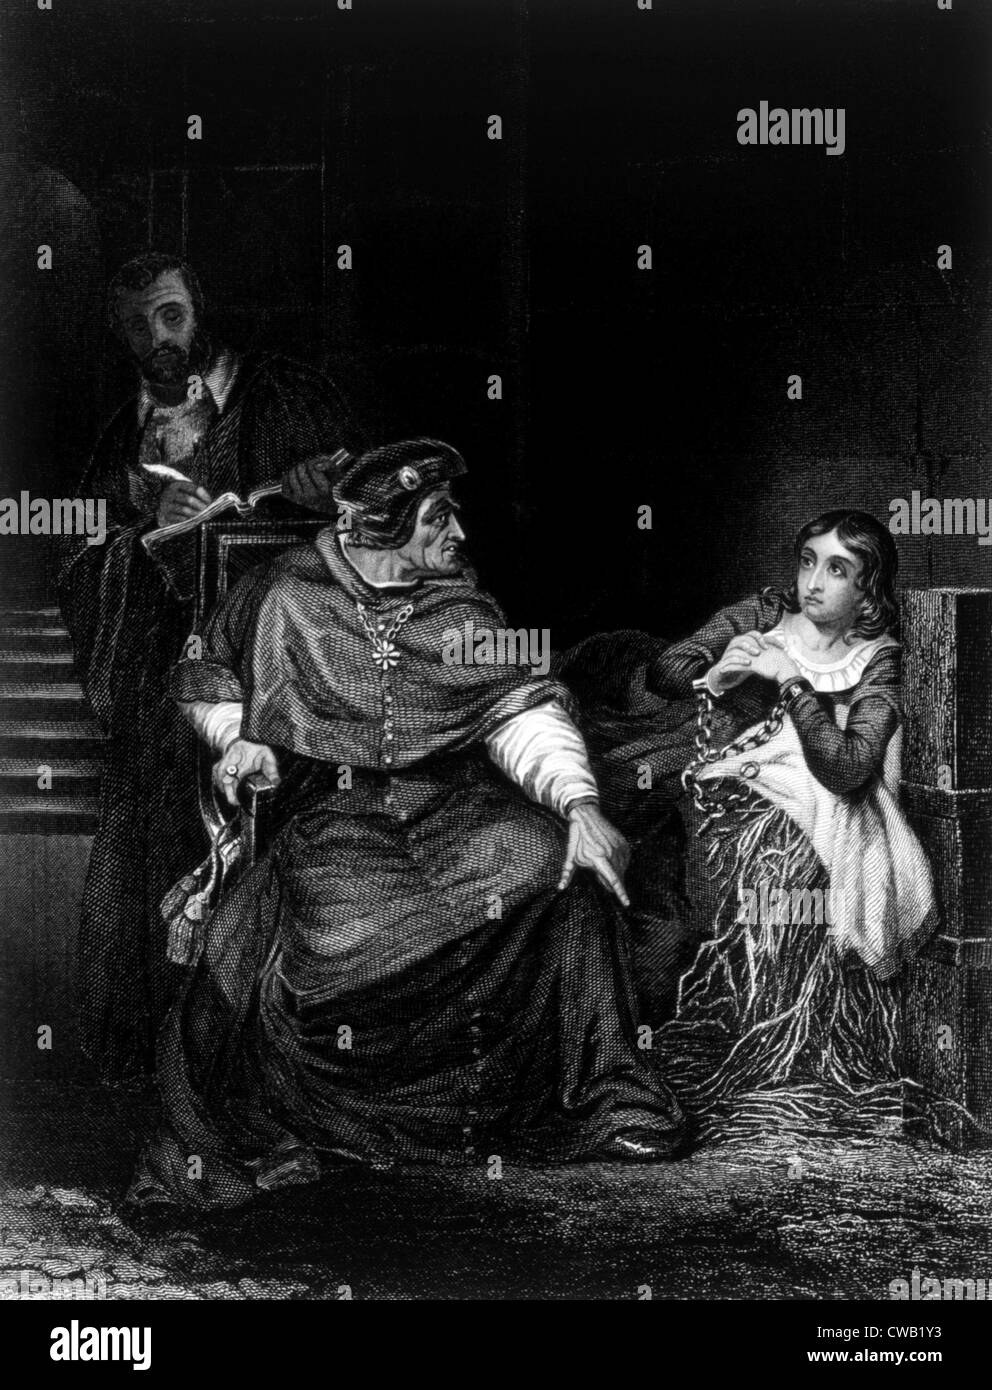 Joan of Arc in prison (1431), engraving after painting by Paul Delaroche, 1882 Stock Photo